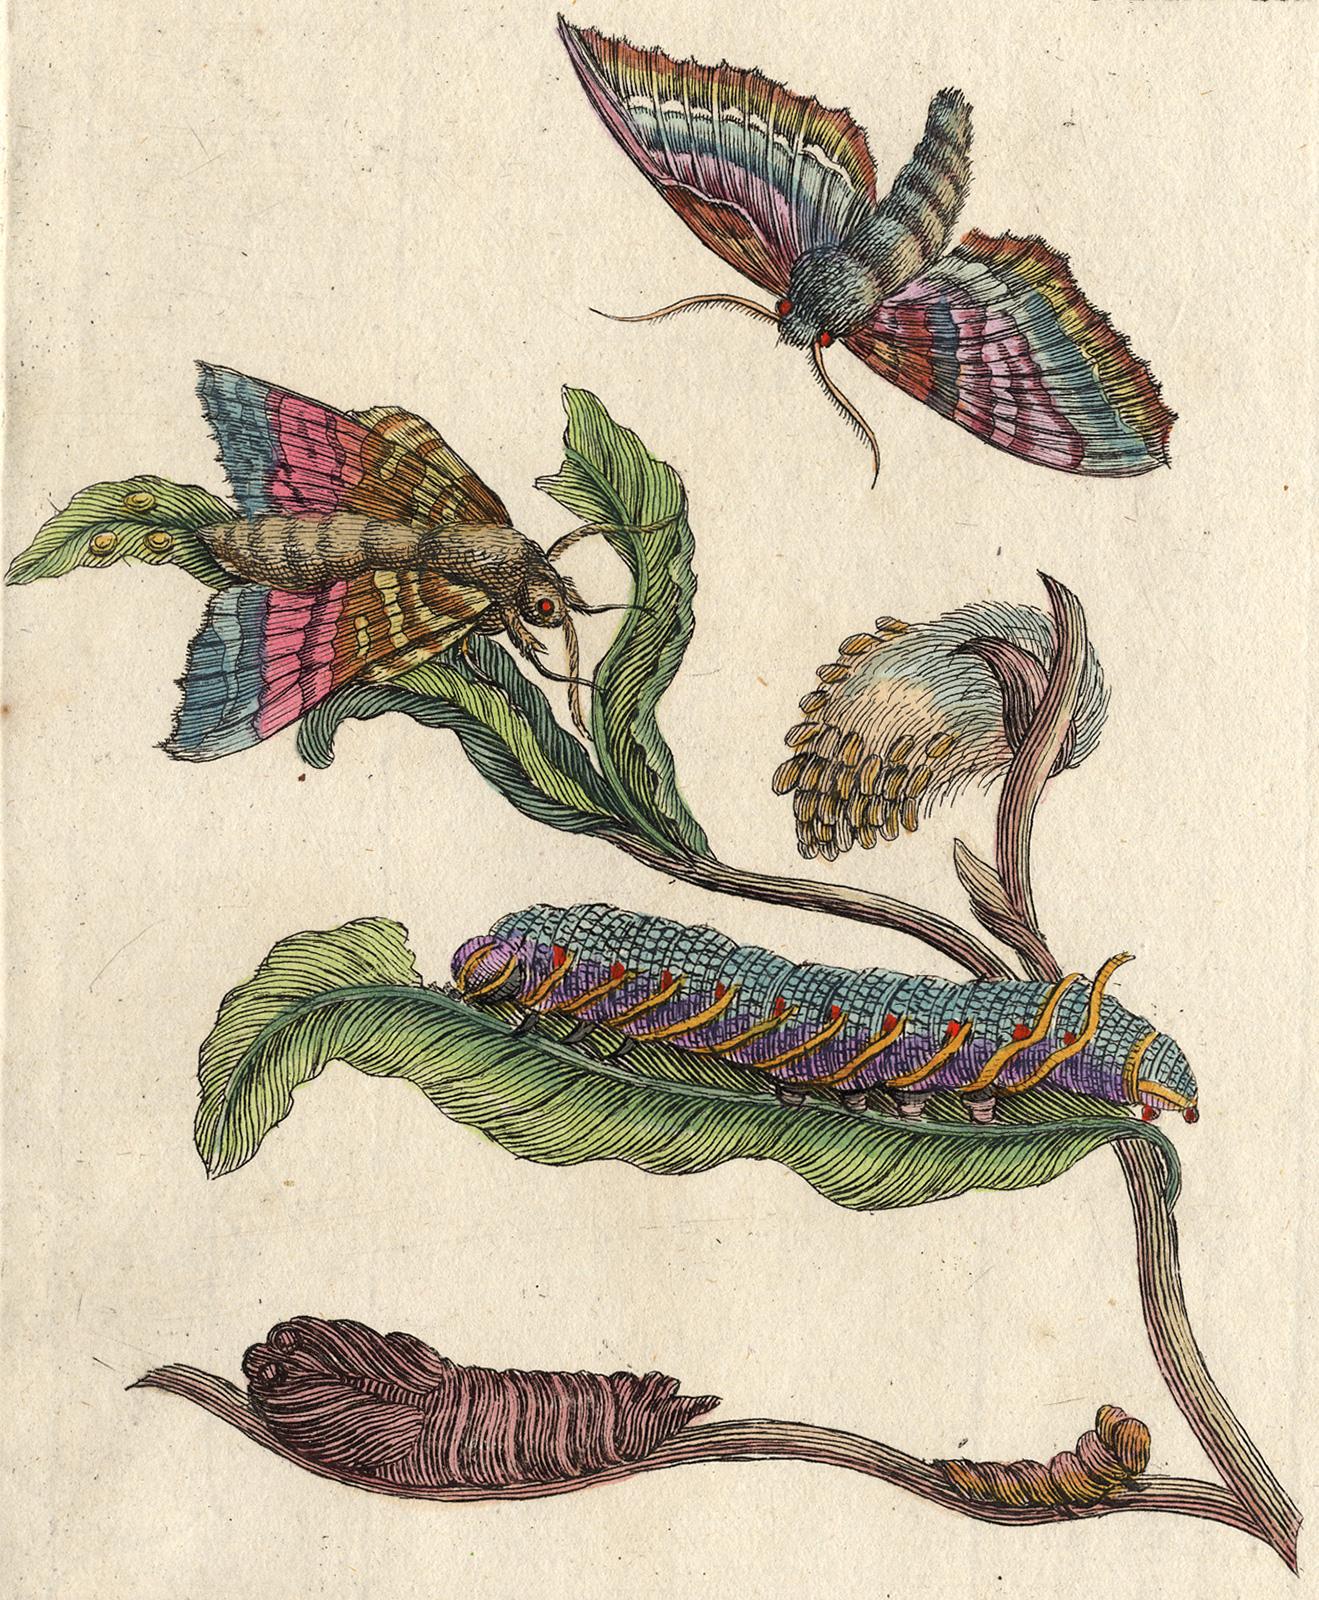 Black Willow with insects by Merian - Handcoloured engraving - 18th century - Print by Maria Sybilla Merian